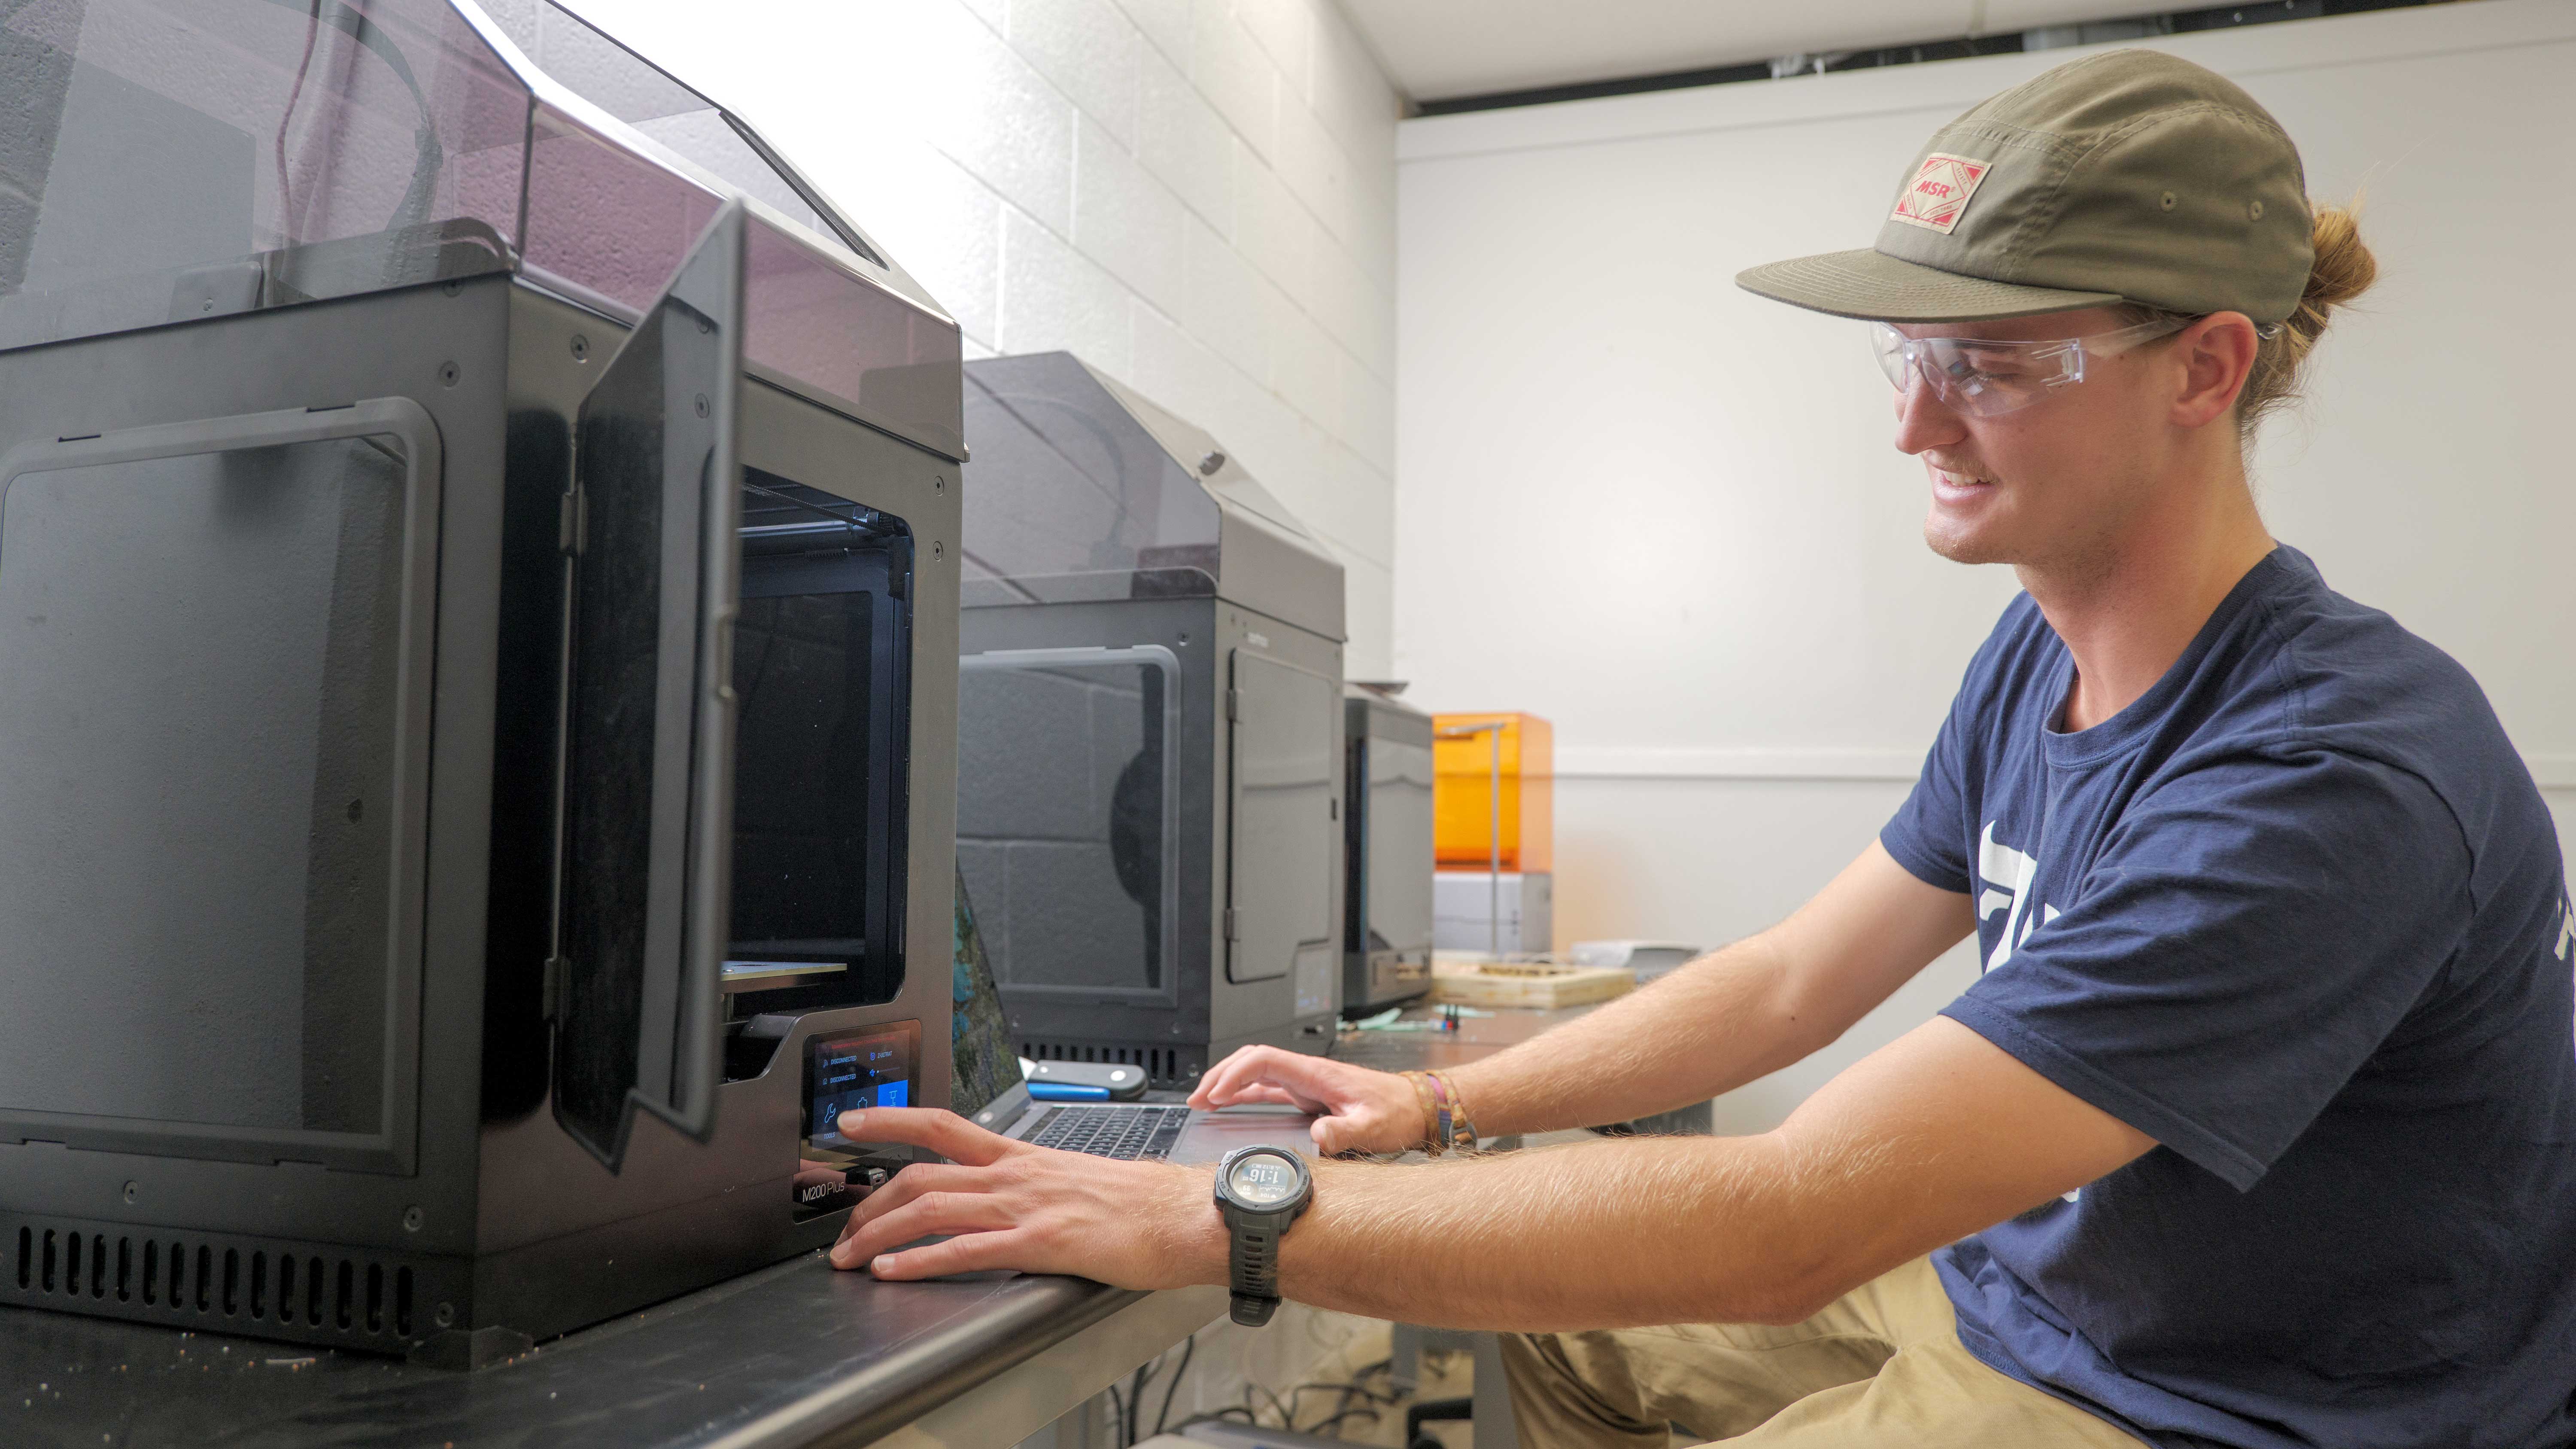 Technology Systems student working in the 3D printing lab.